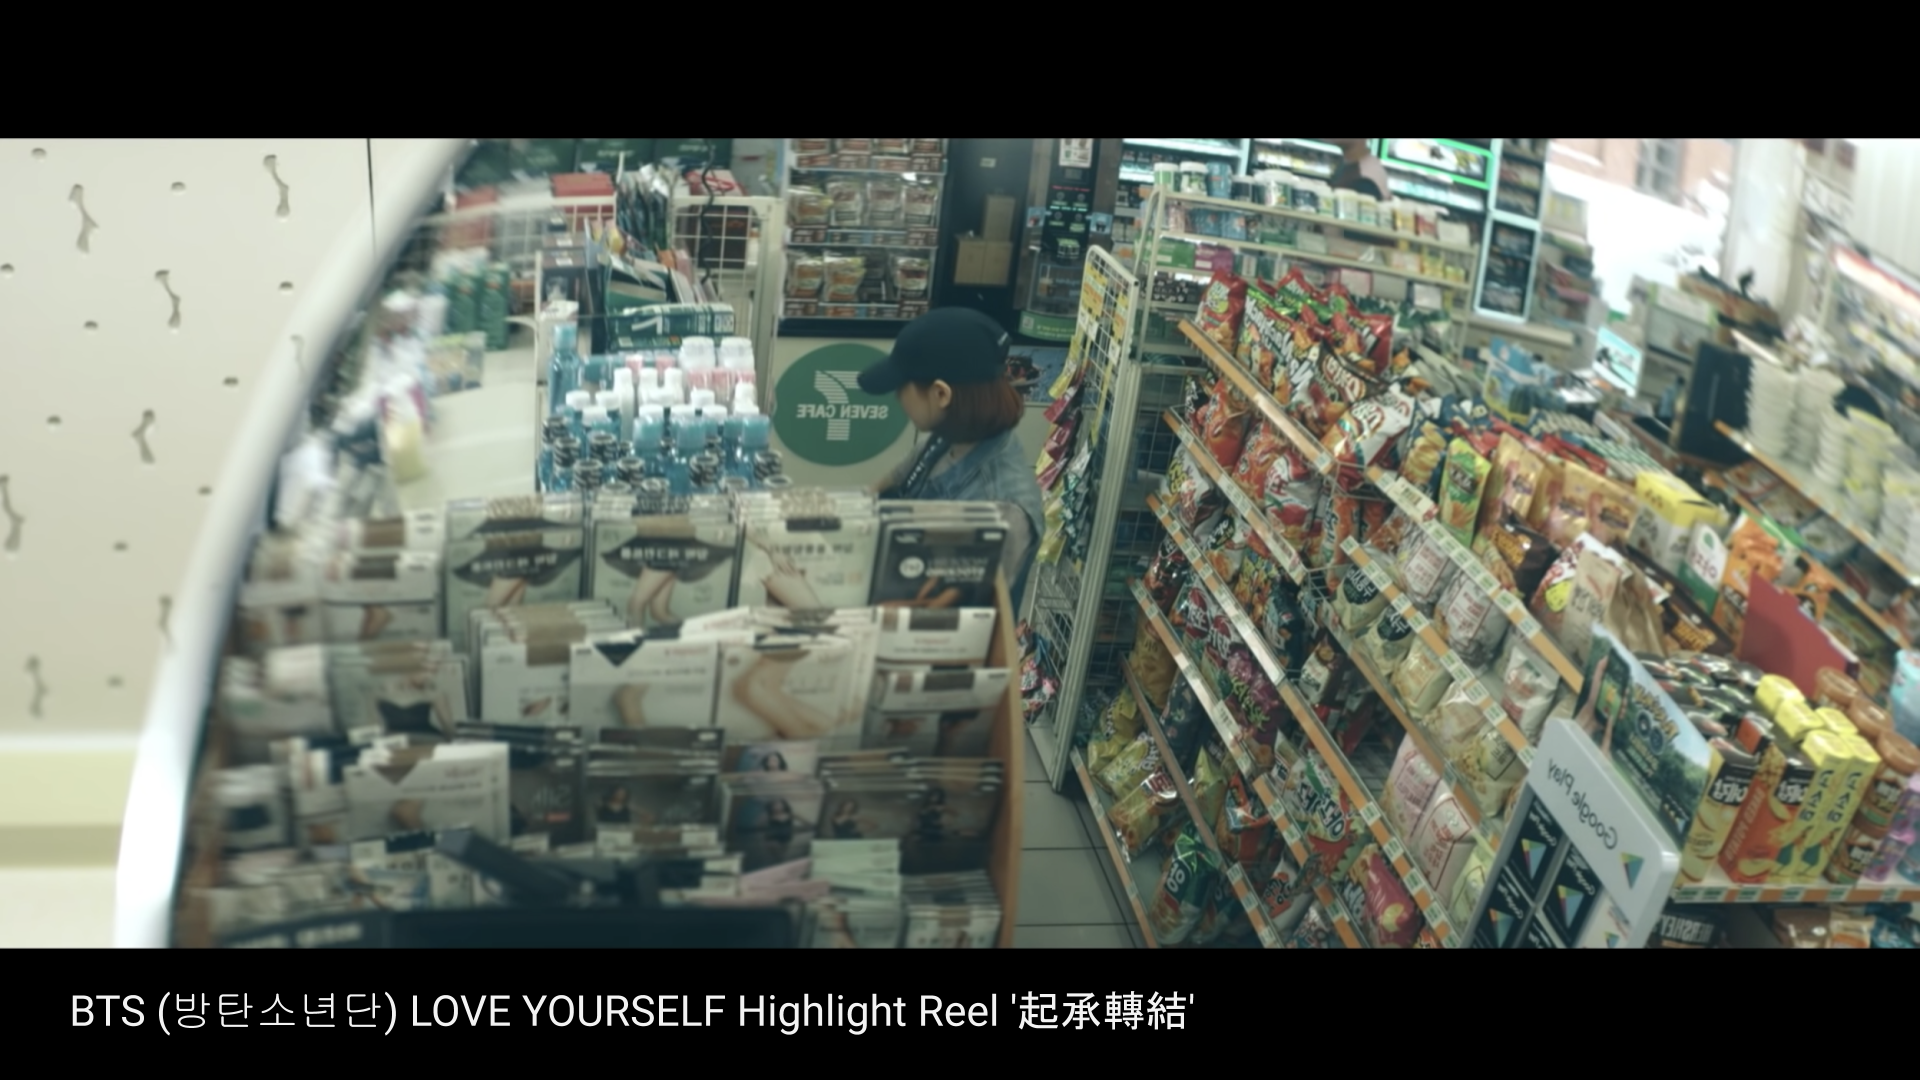 Convenience Store Image 3